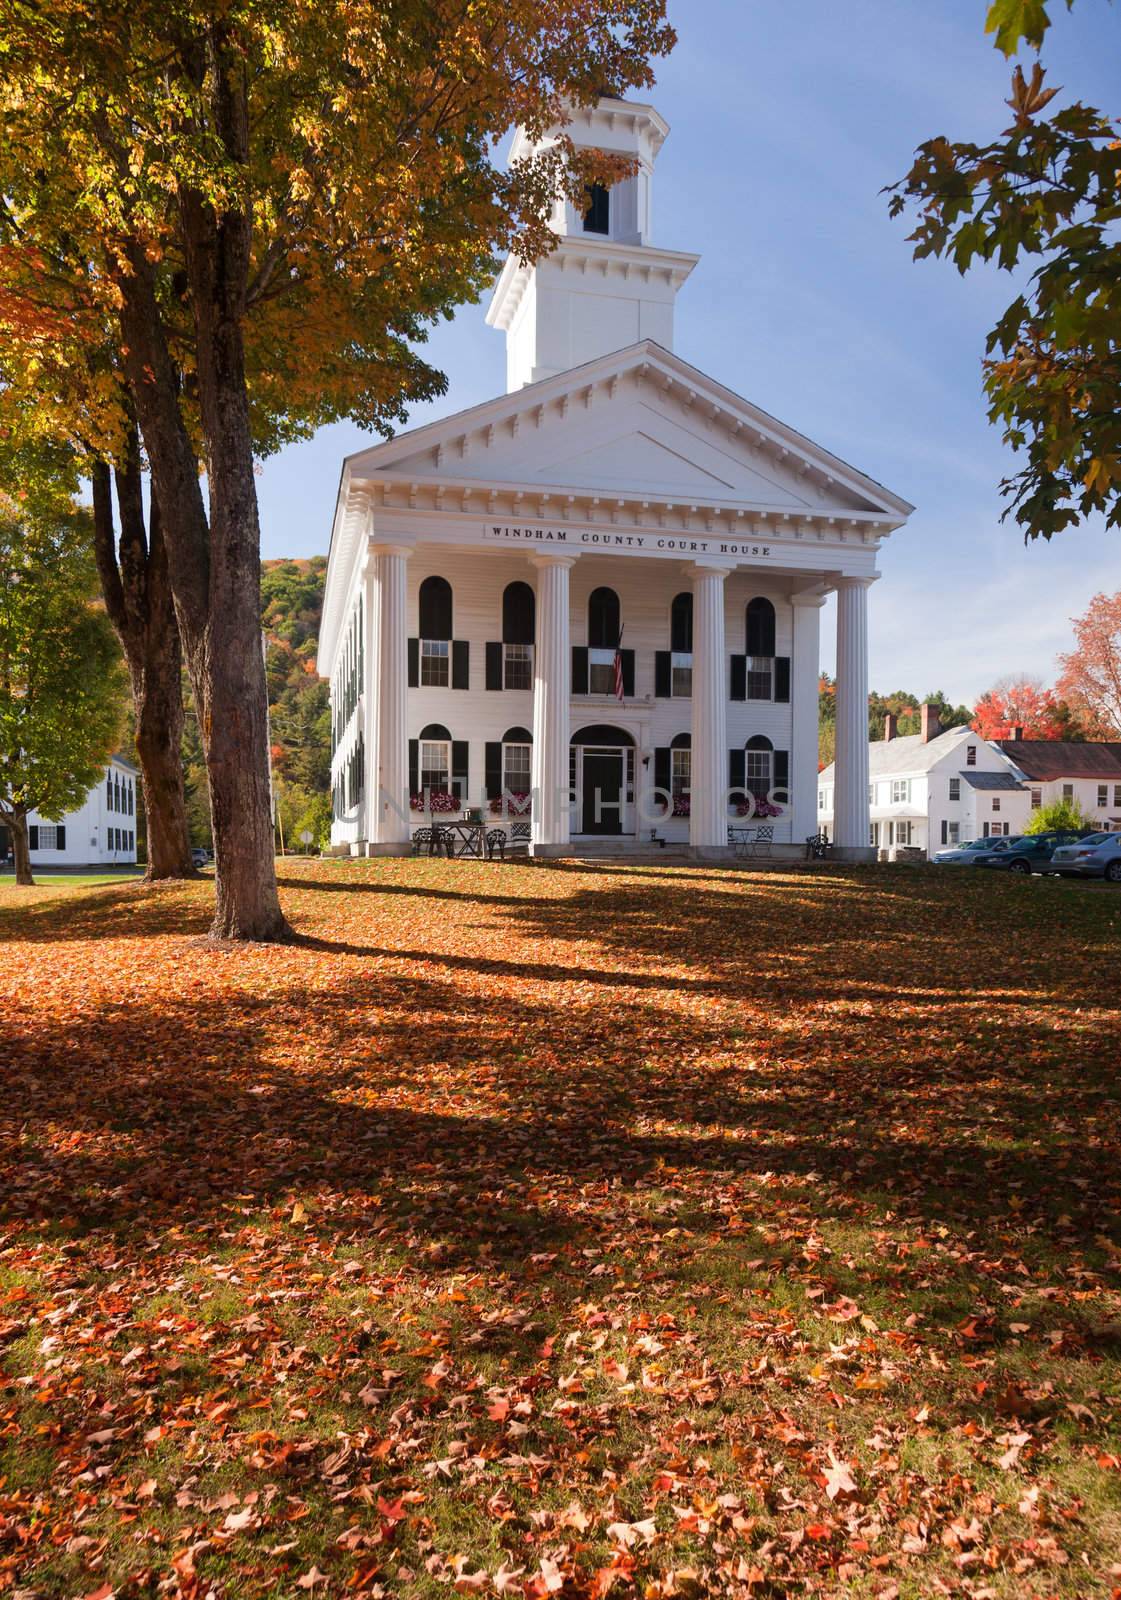 Windham Court house in Fall by steheap